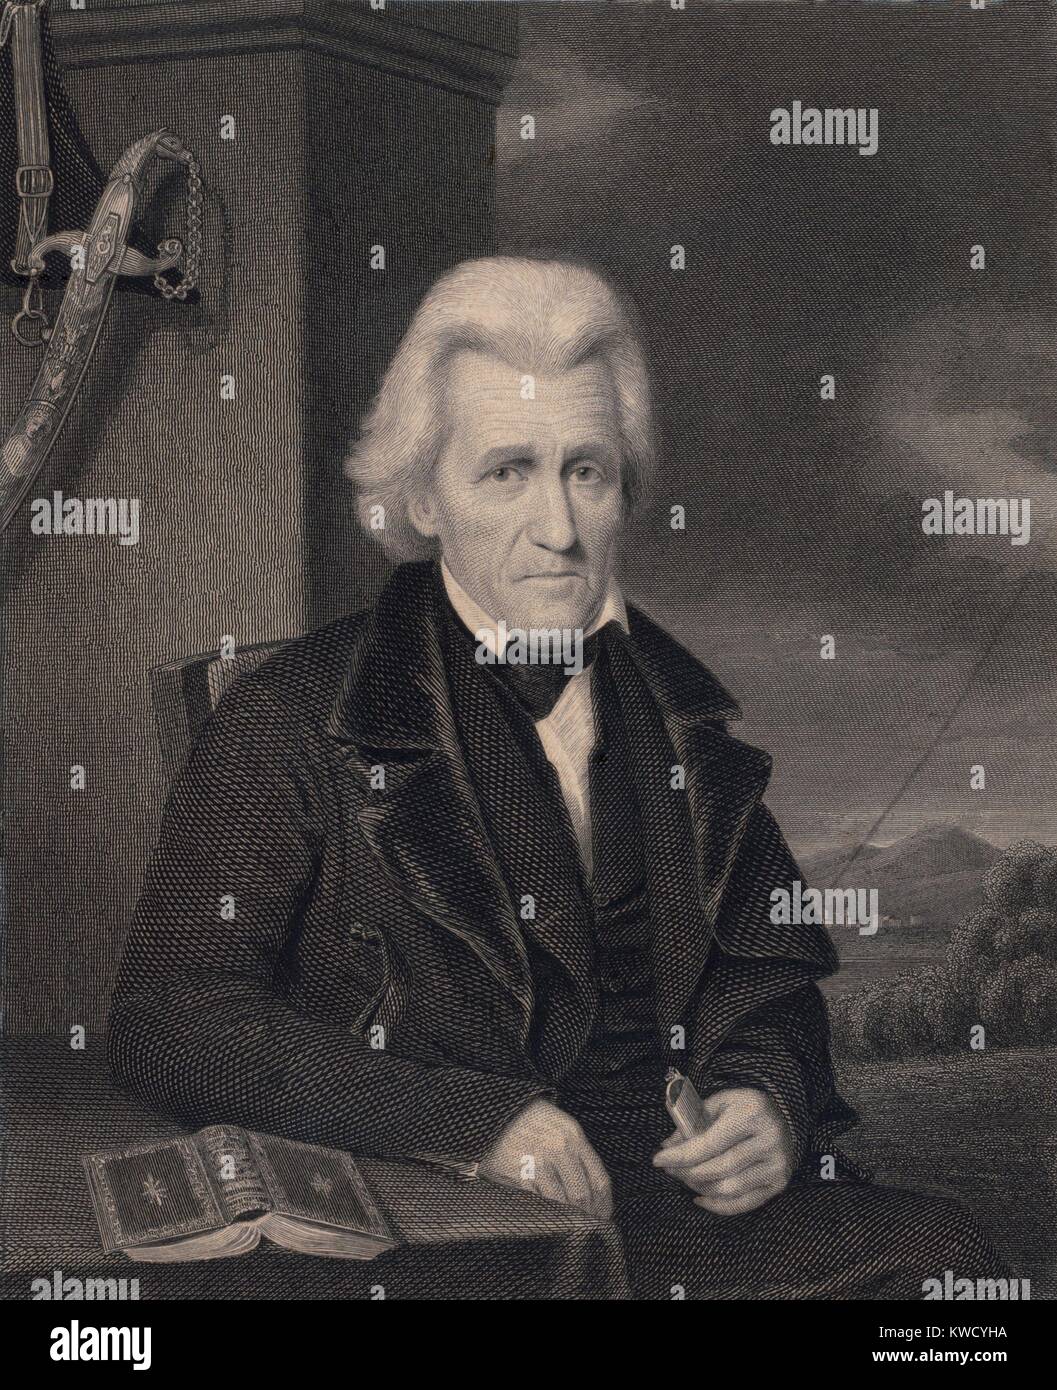 Andrew Jackson, engraving after 1842 miniature painting by Charles Havens Hunt. 1843 engraving by Moseley Isaac Danforth (BSLOC 2017 6 12) Stock Photo